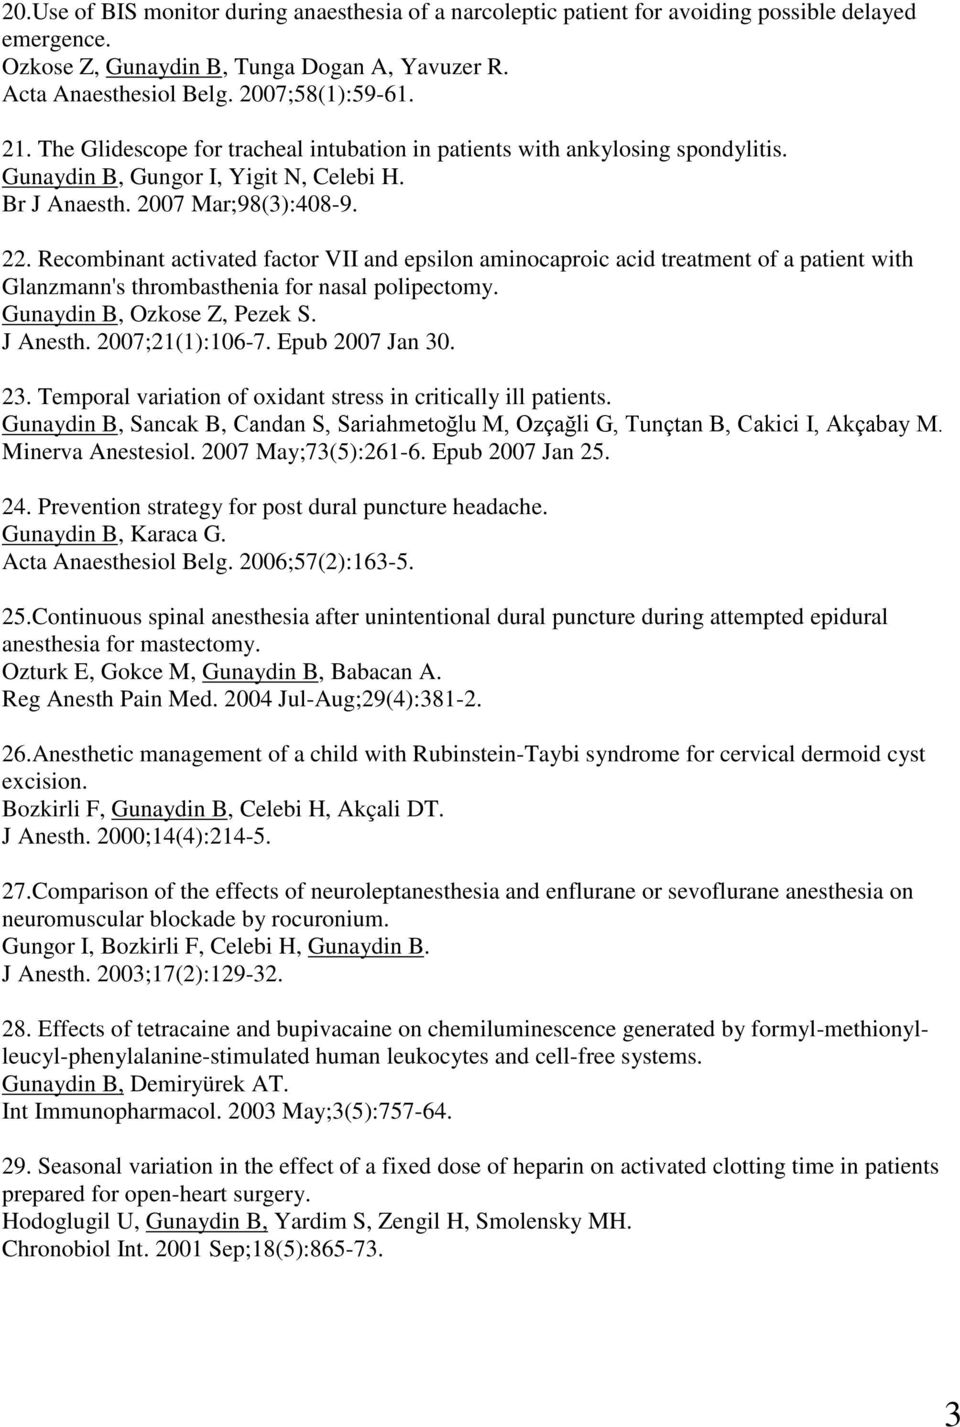 Recombinant activated factor VII and epsilon aminocaproic acid treatment of a patient with Glanzmann's thrombasthenia for nasal polipectomy. Gunaydin B, Ozkose Z, Pezek S. J Anesth. 2007;21(1):106-7.